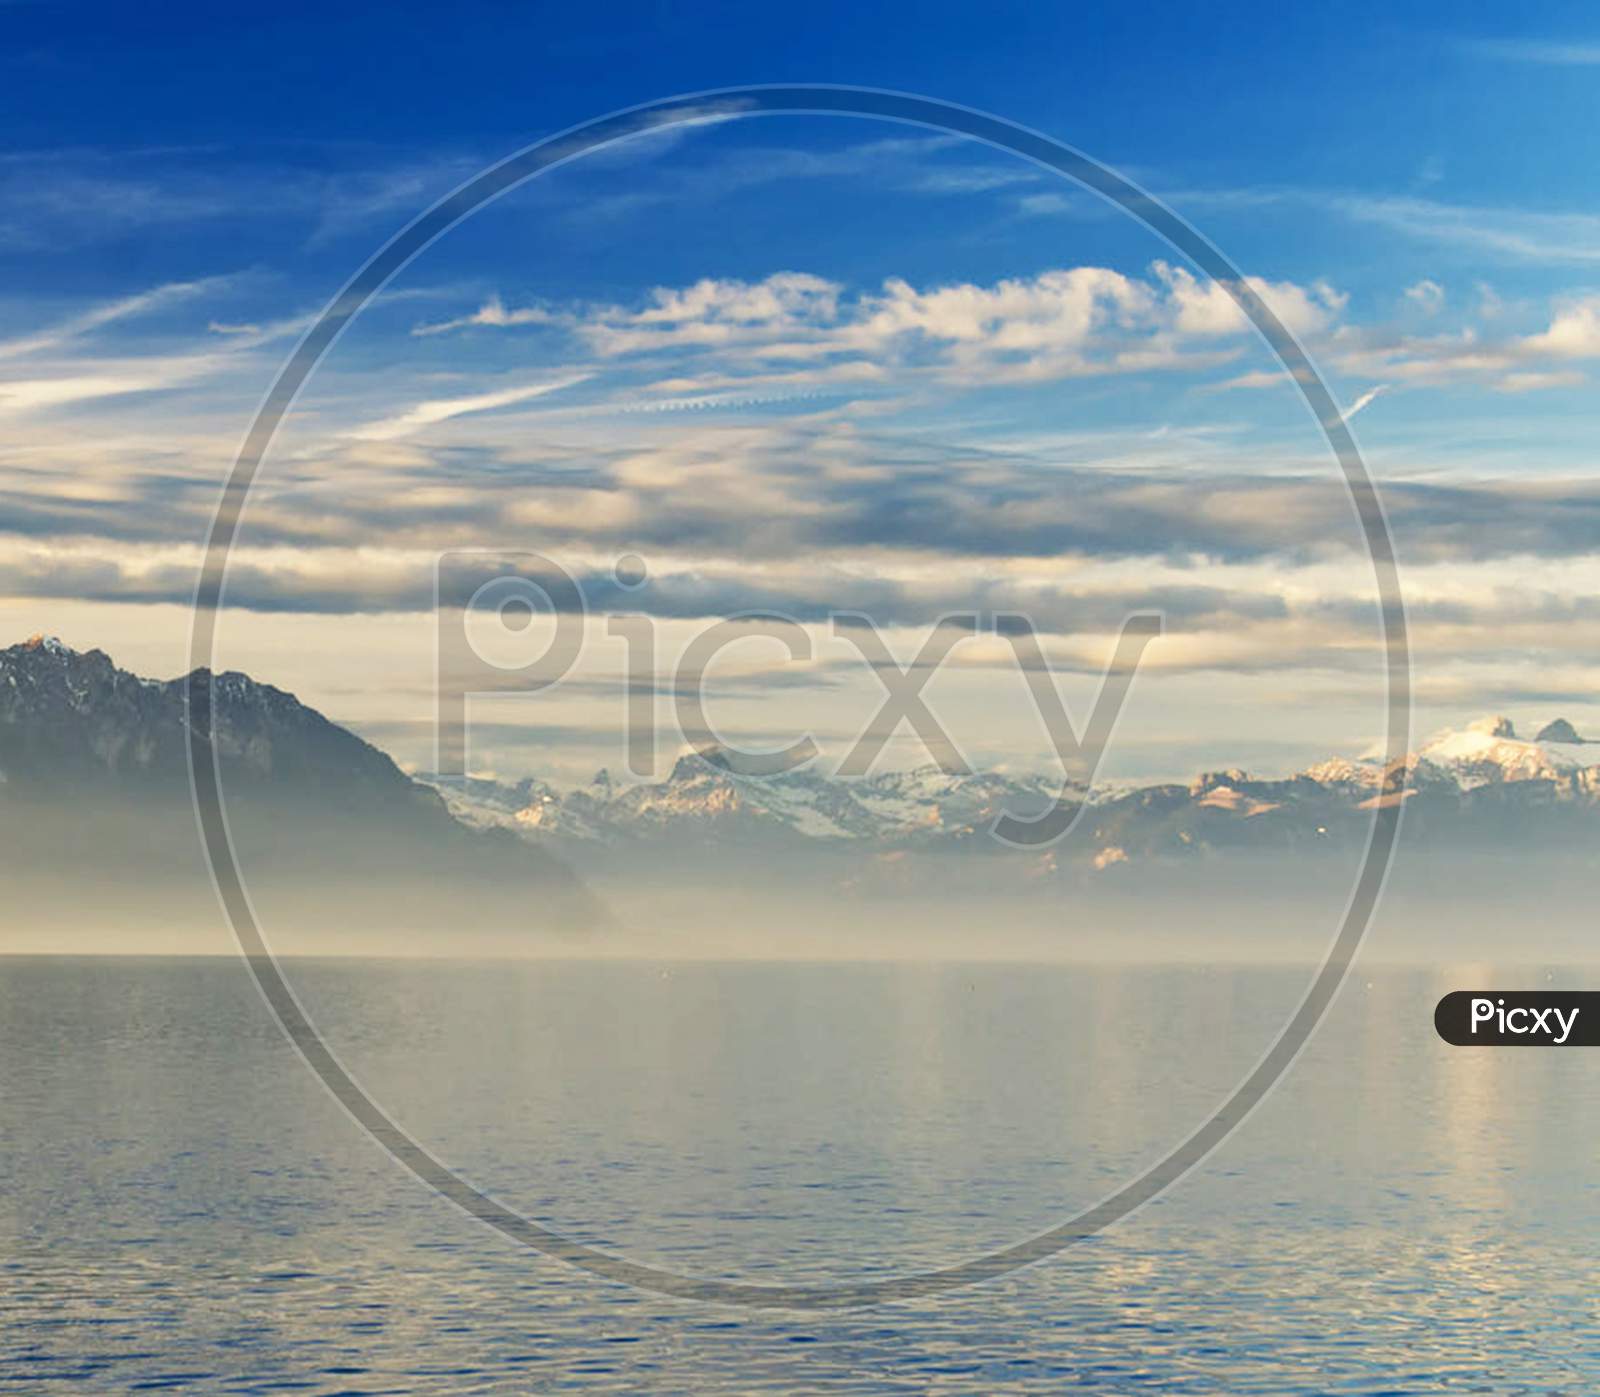 Beautiful pictures of Lausanne